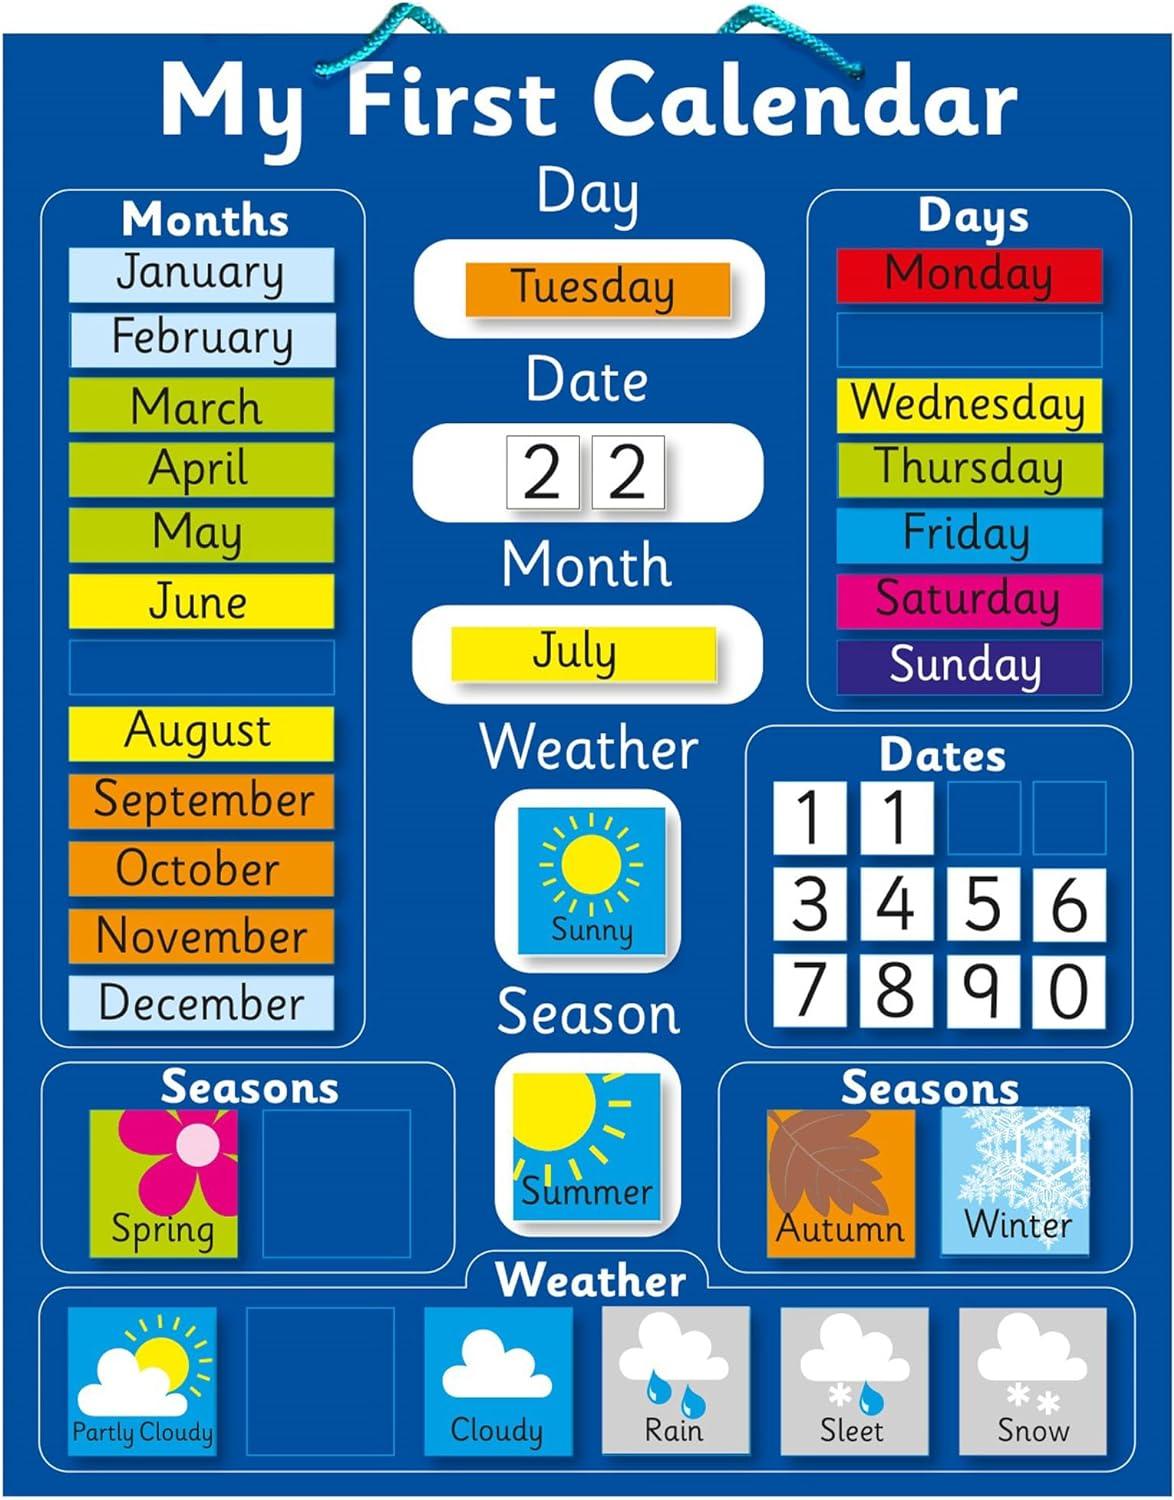 my first magnetic calendar - blue - educational learning tool for children - 40x32cm rigid board with hanging